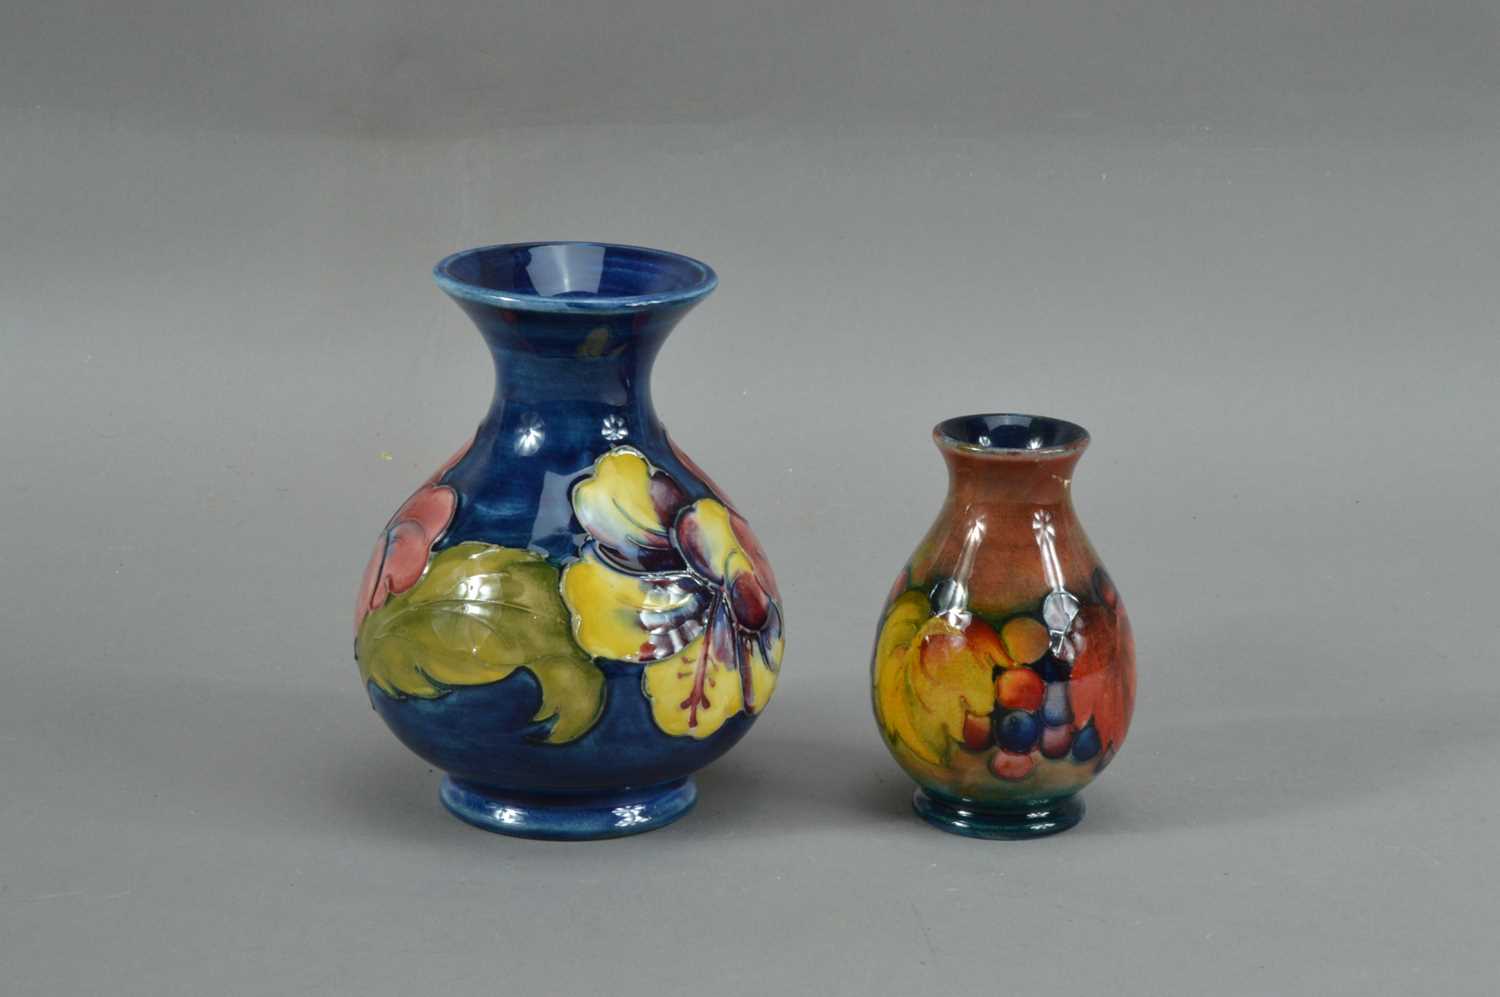 Lot 232 - An early to mid 20th century Moorcroft pottery baluster vase